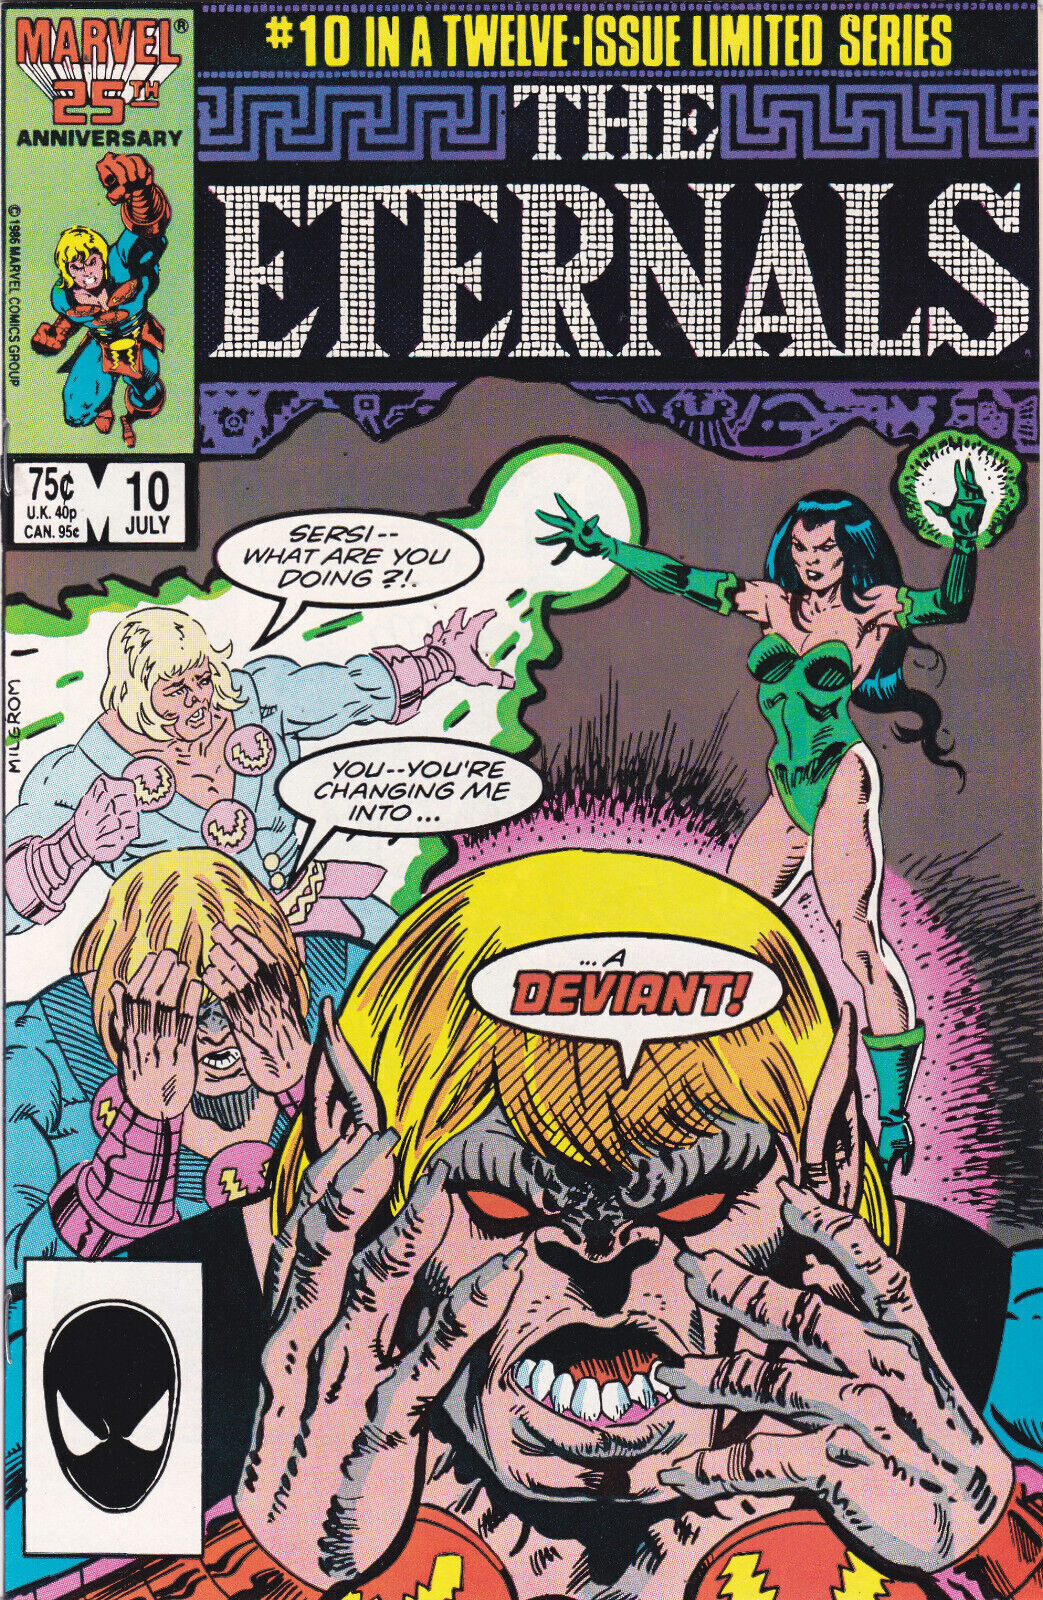 The Eternals, #10 of 12, Marvel Comics, 1985, Copper Age, High Grade,New Movie